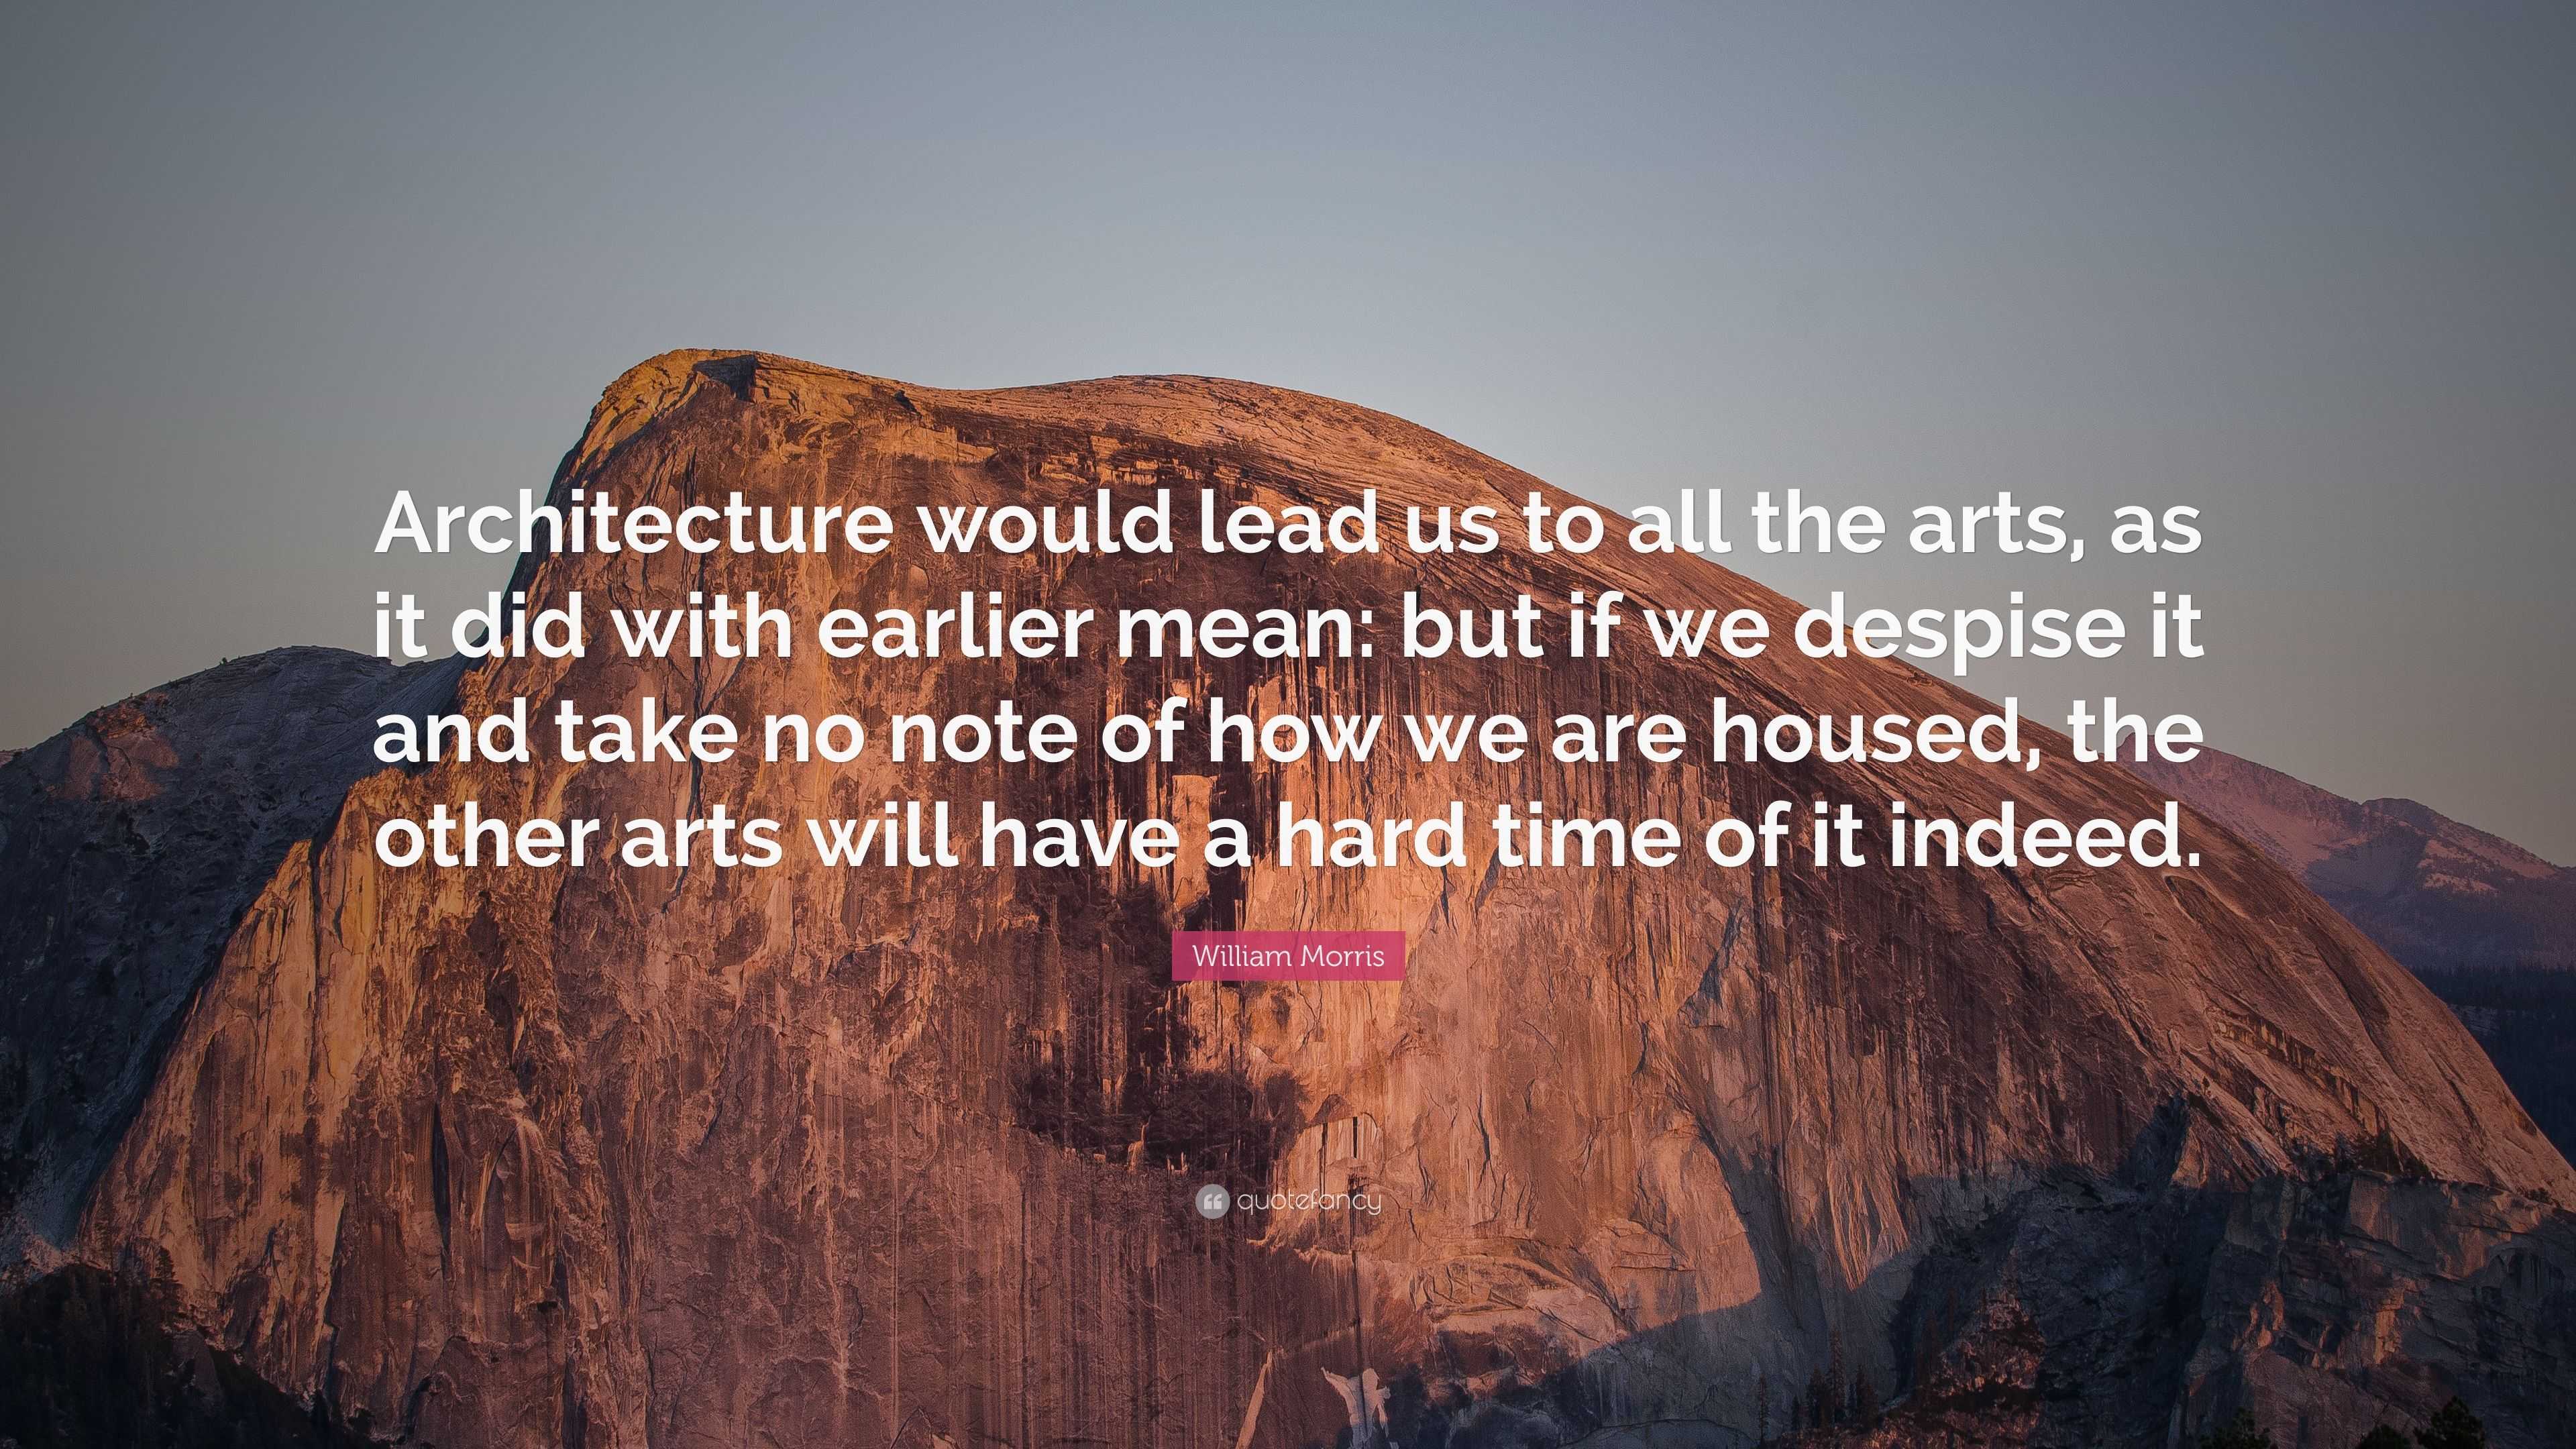 William Morris Quote: “Architecture would lead us to all the arts, as ...